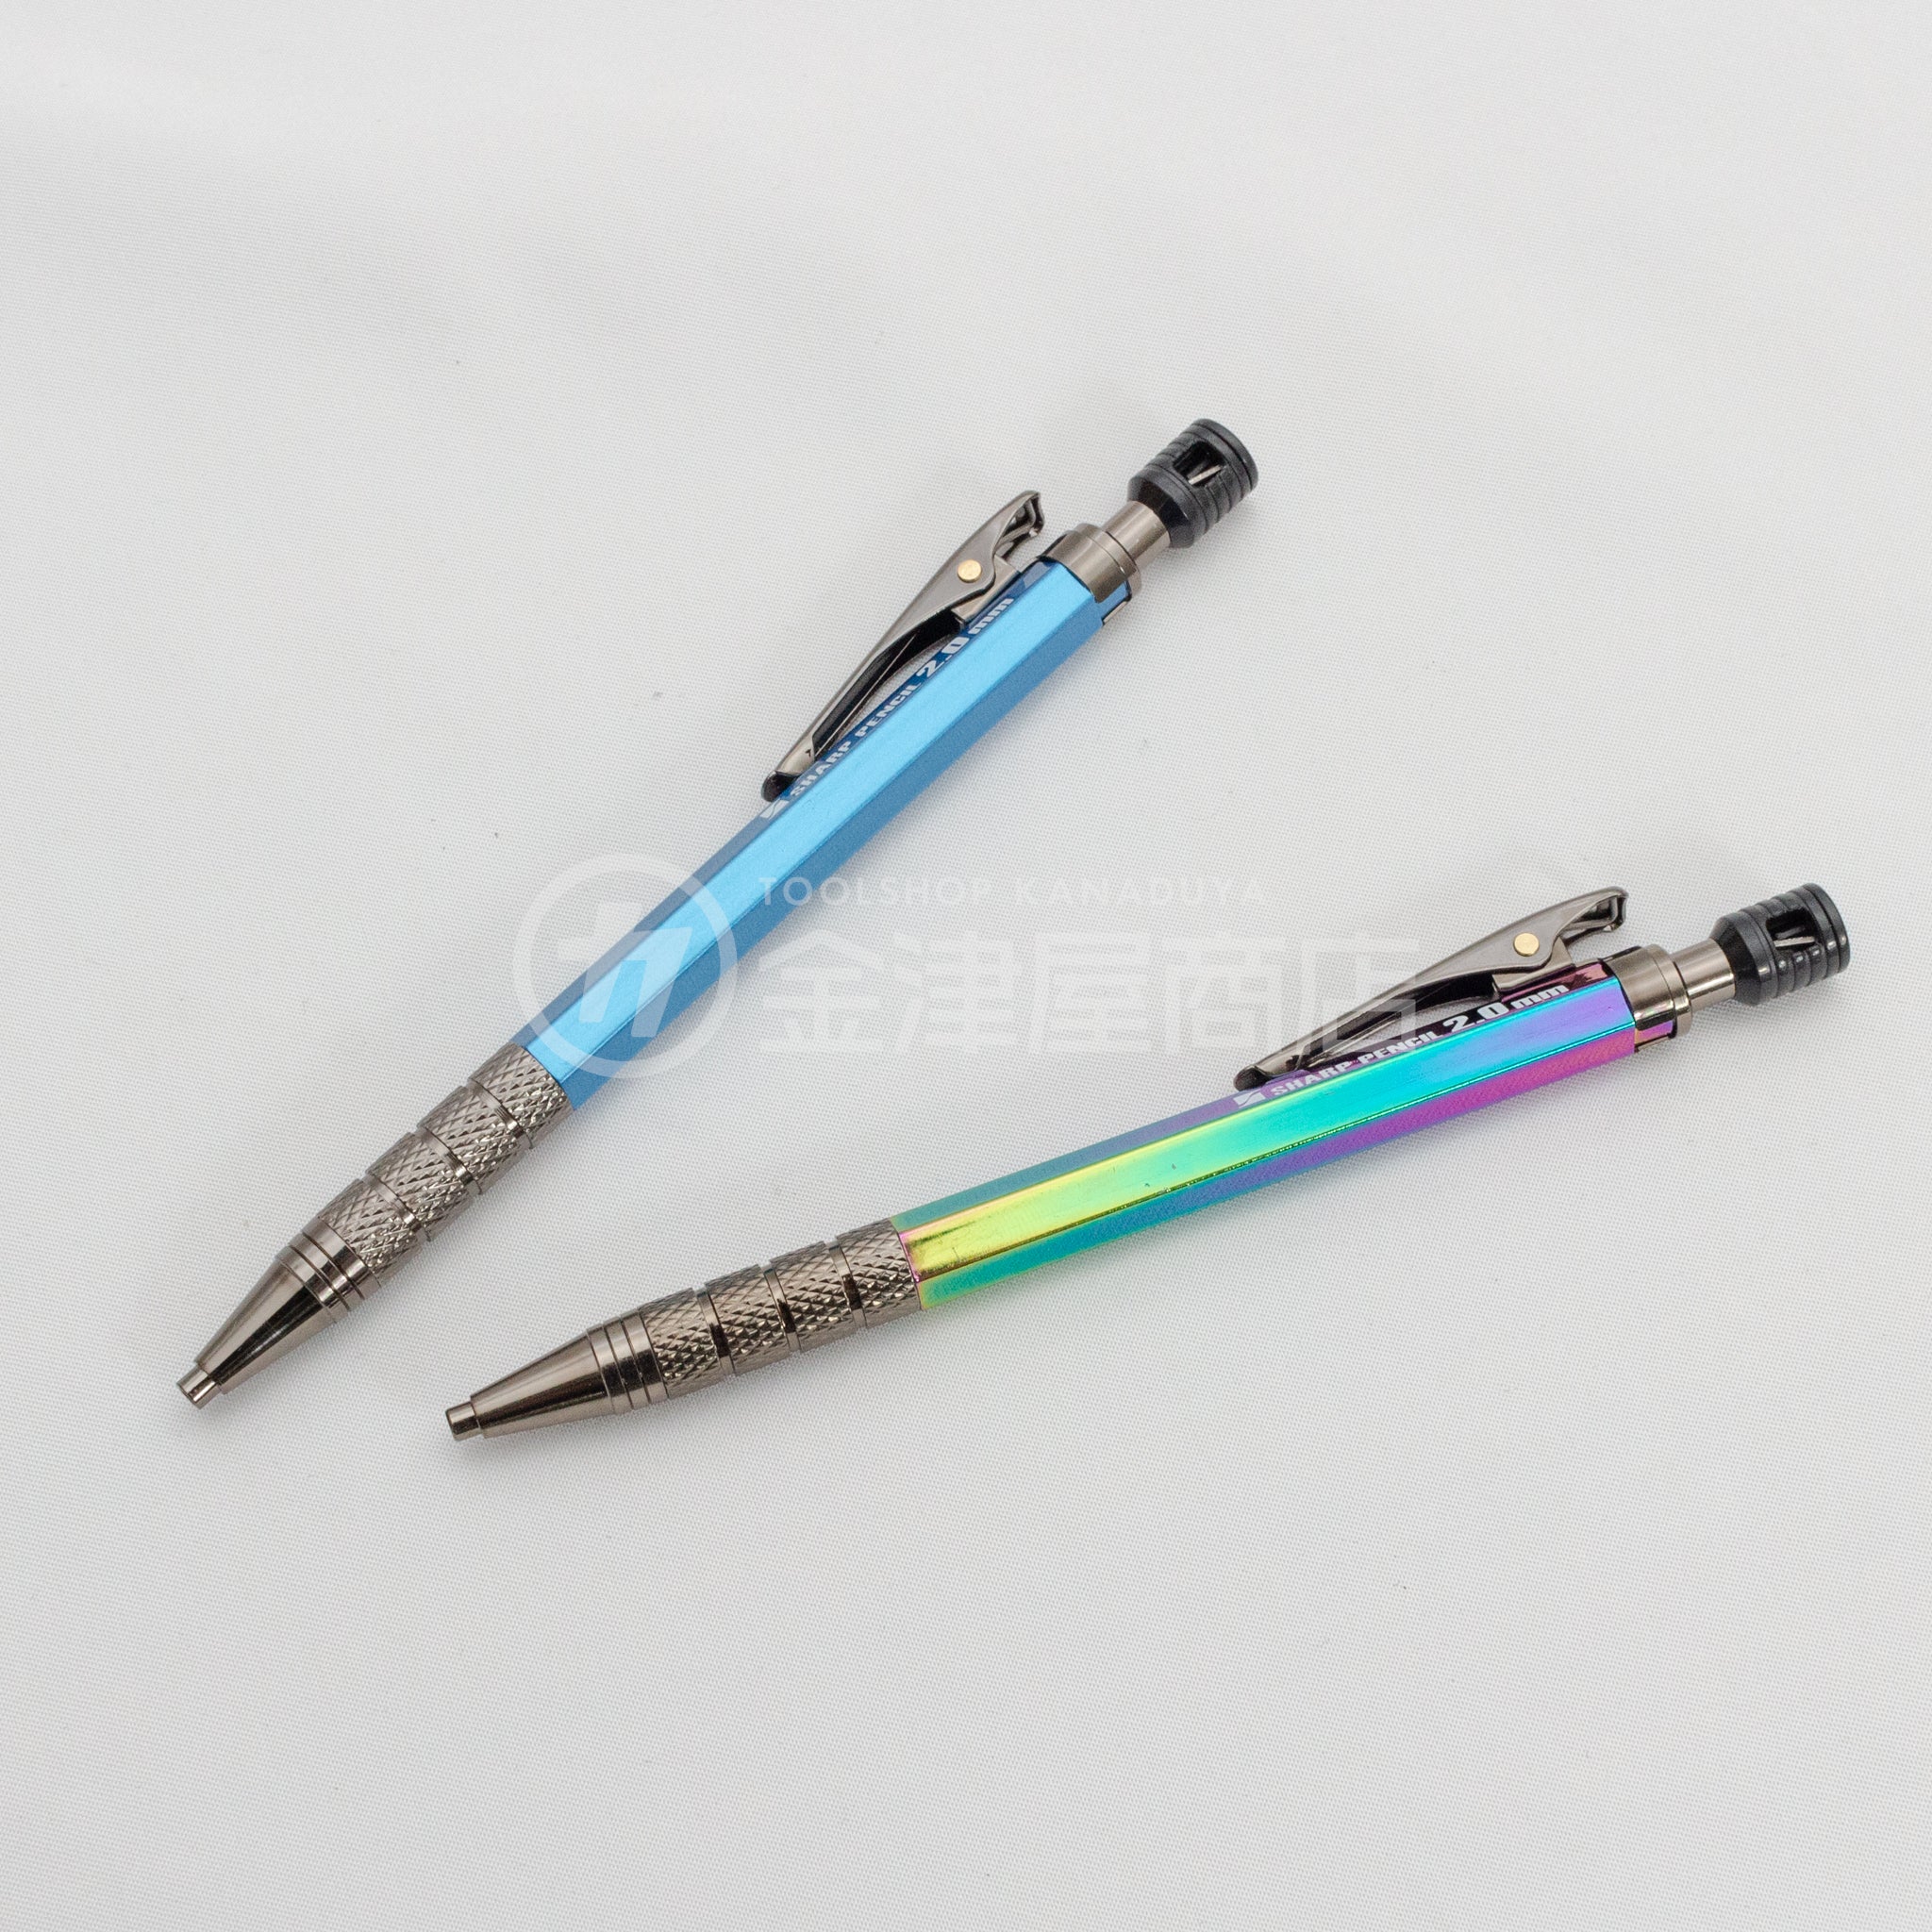 Shosekido Architectural Mechanical Pencil 2.0mm Suzaku Brass Body Limited  Color